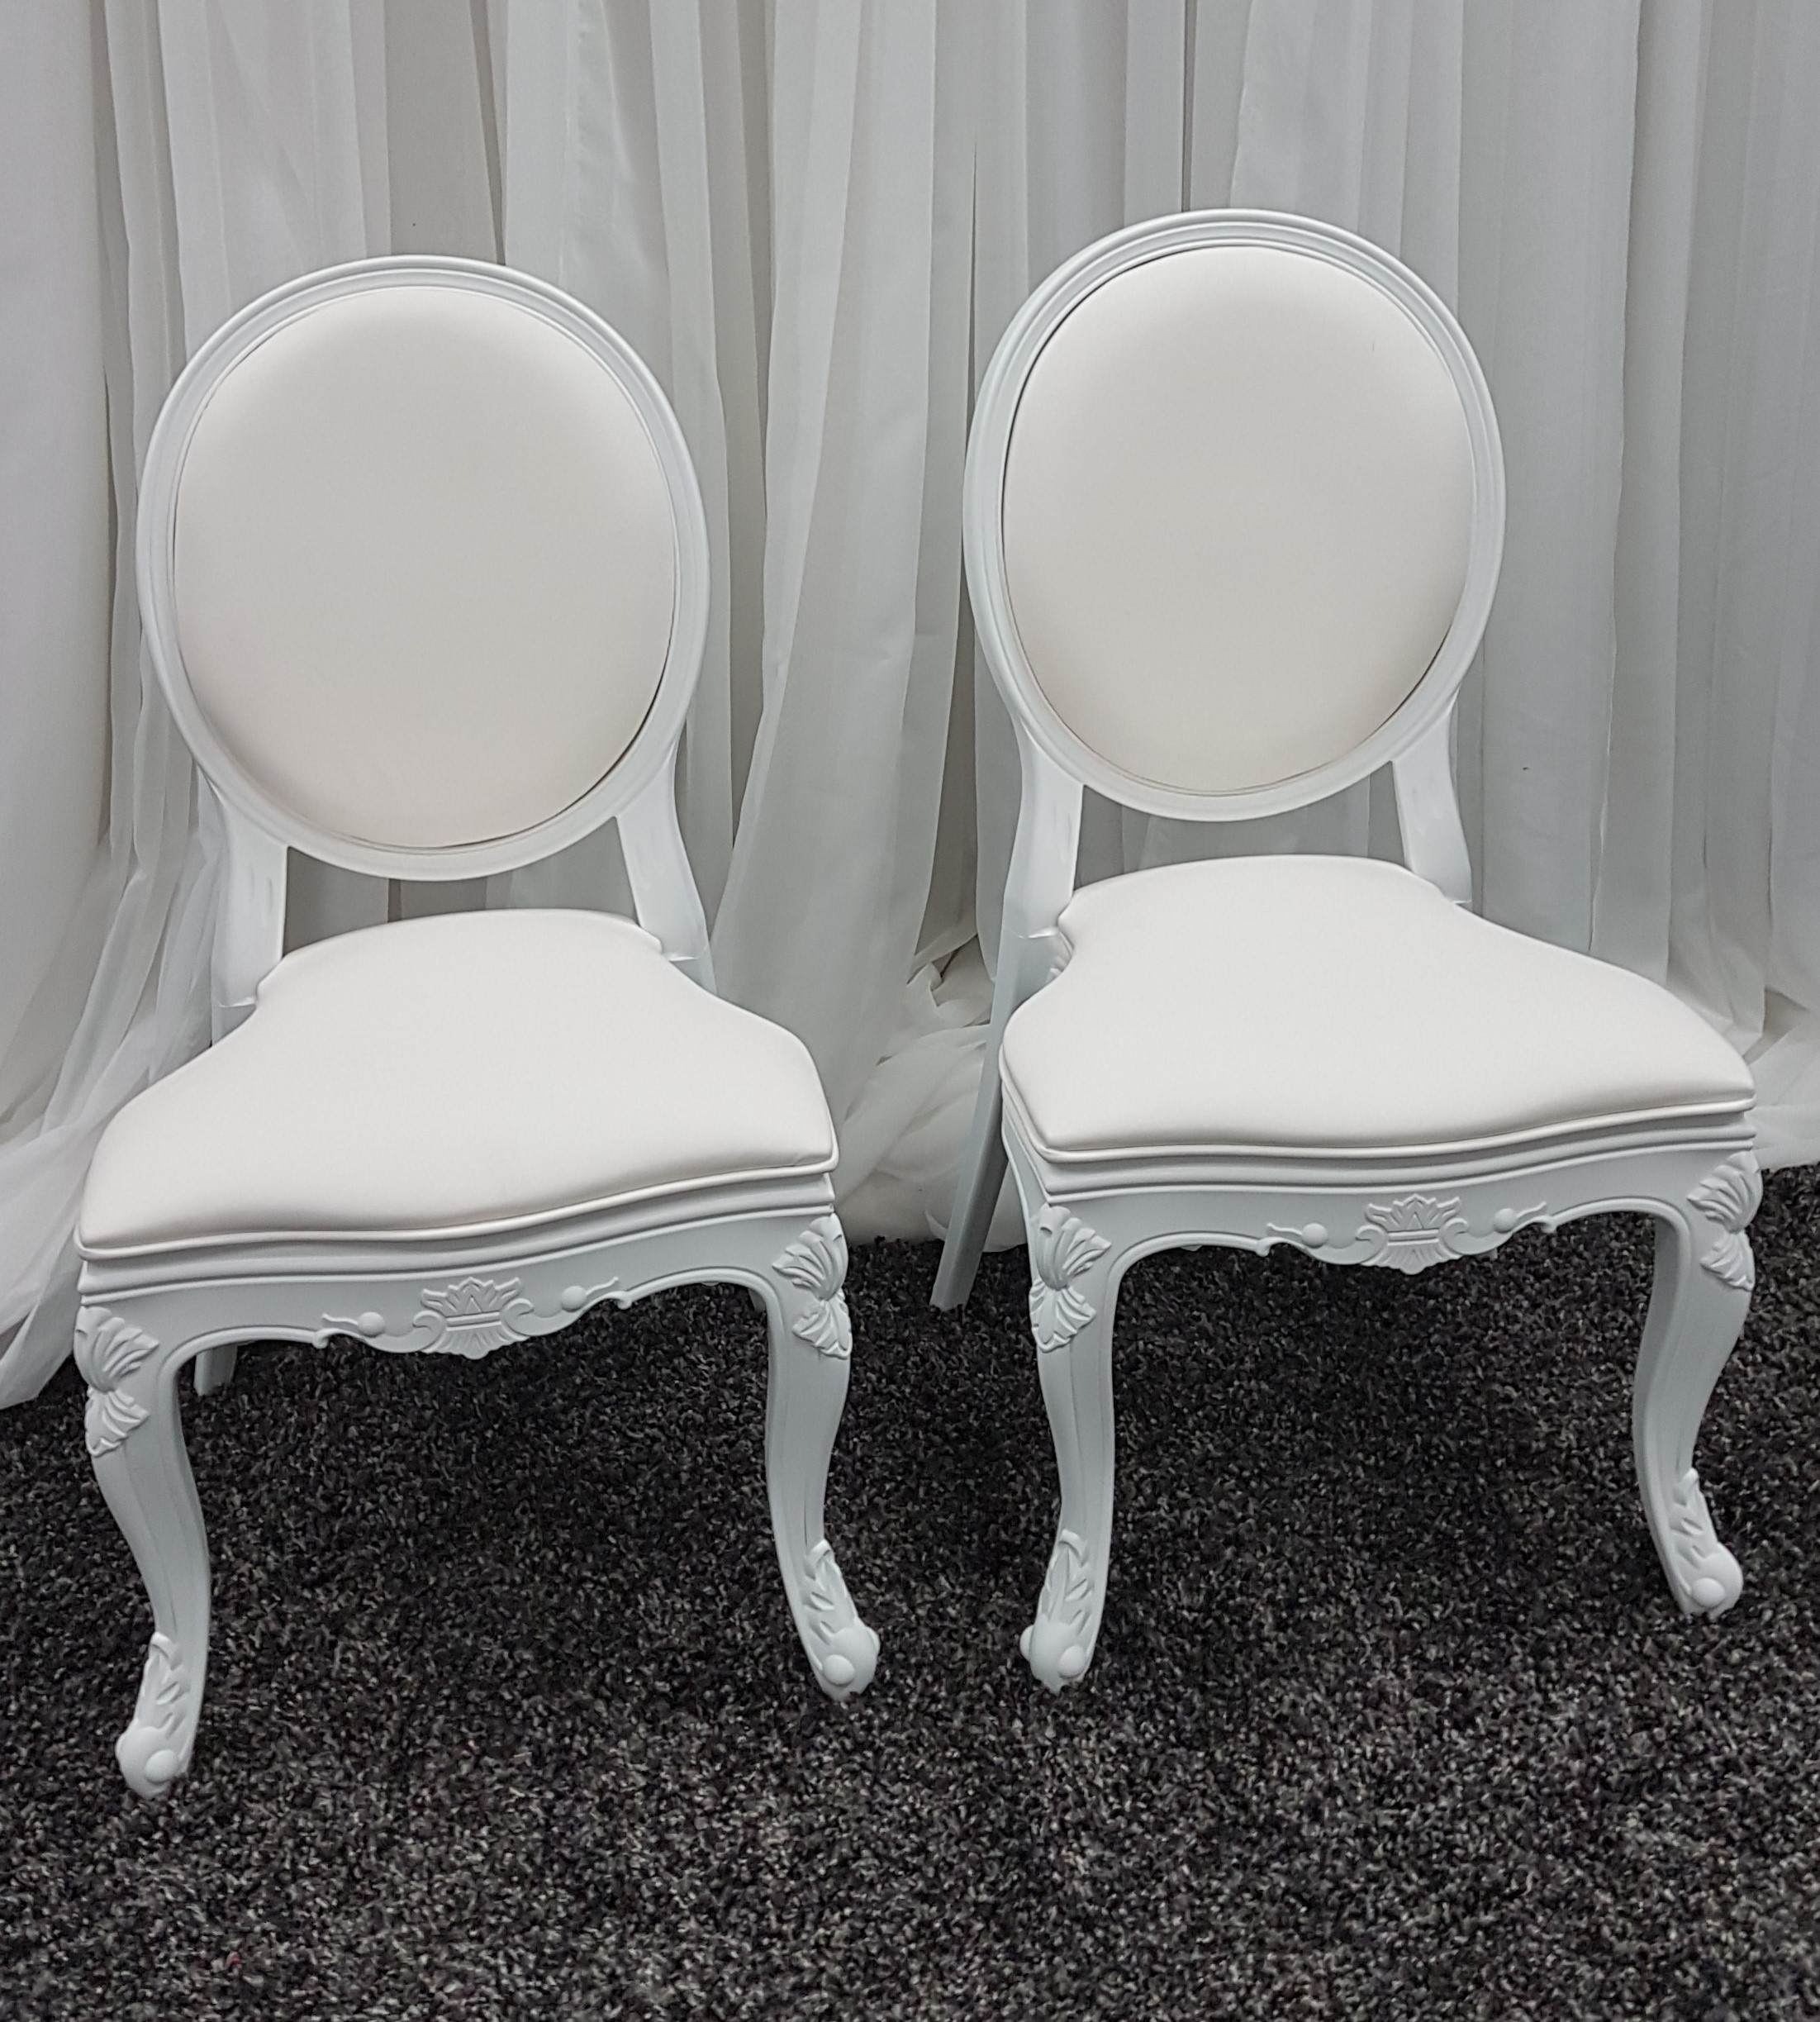 KING LOUIS CHAIR with WHITE SEAT (Indoor use only)